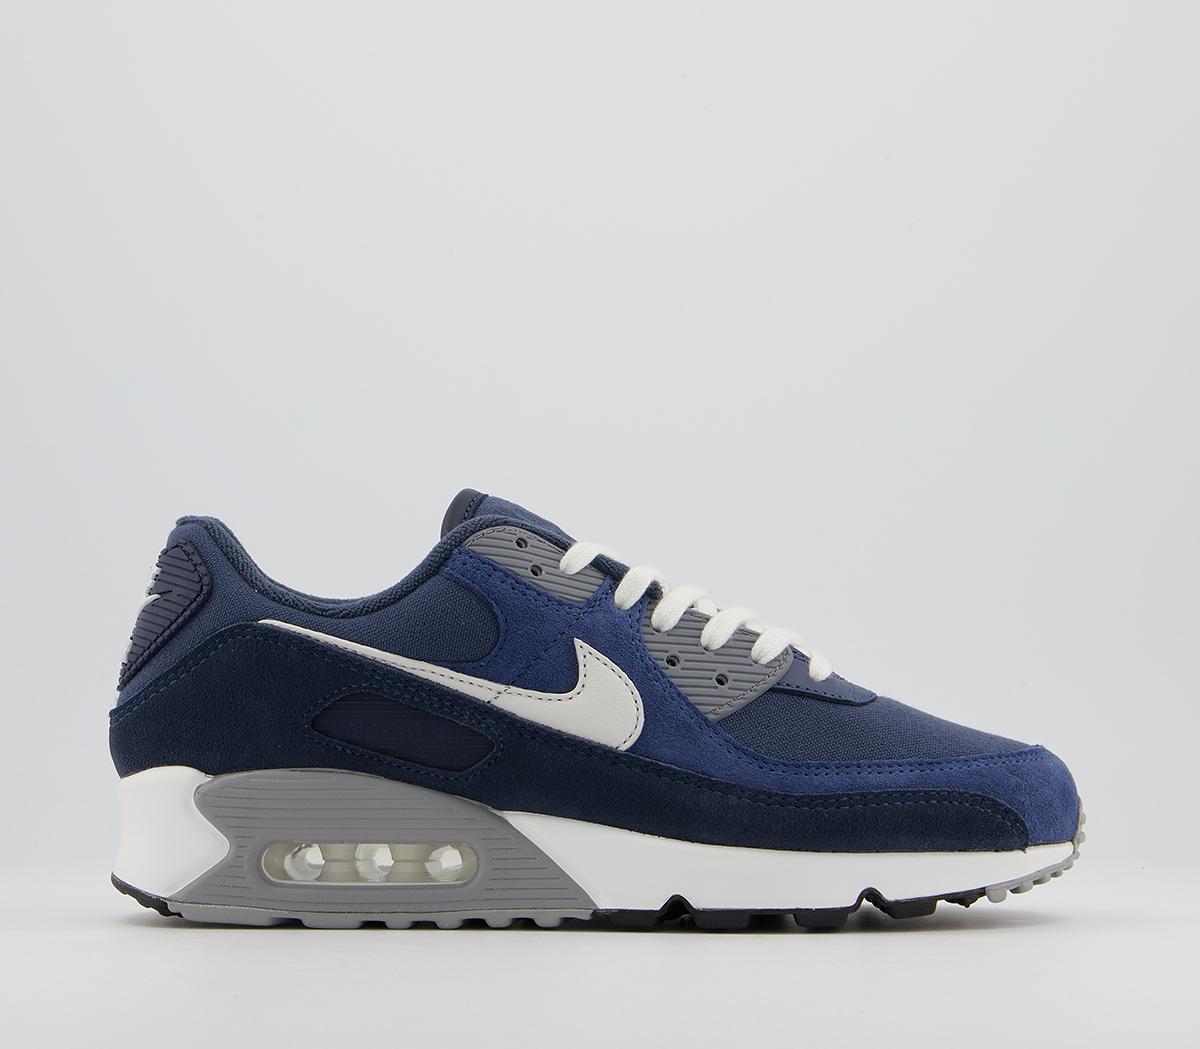 Nike Air Max 90 Trainers Obsidian Grey Midnight Navy Thunder Blue - Women's Trainers